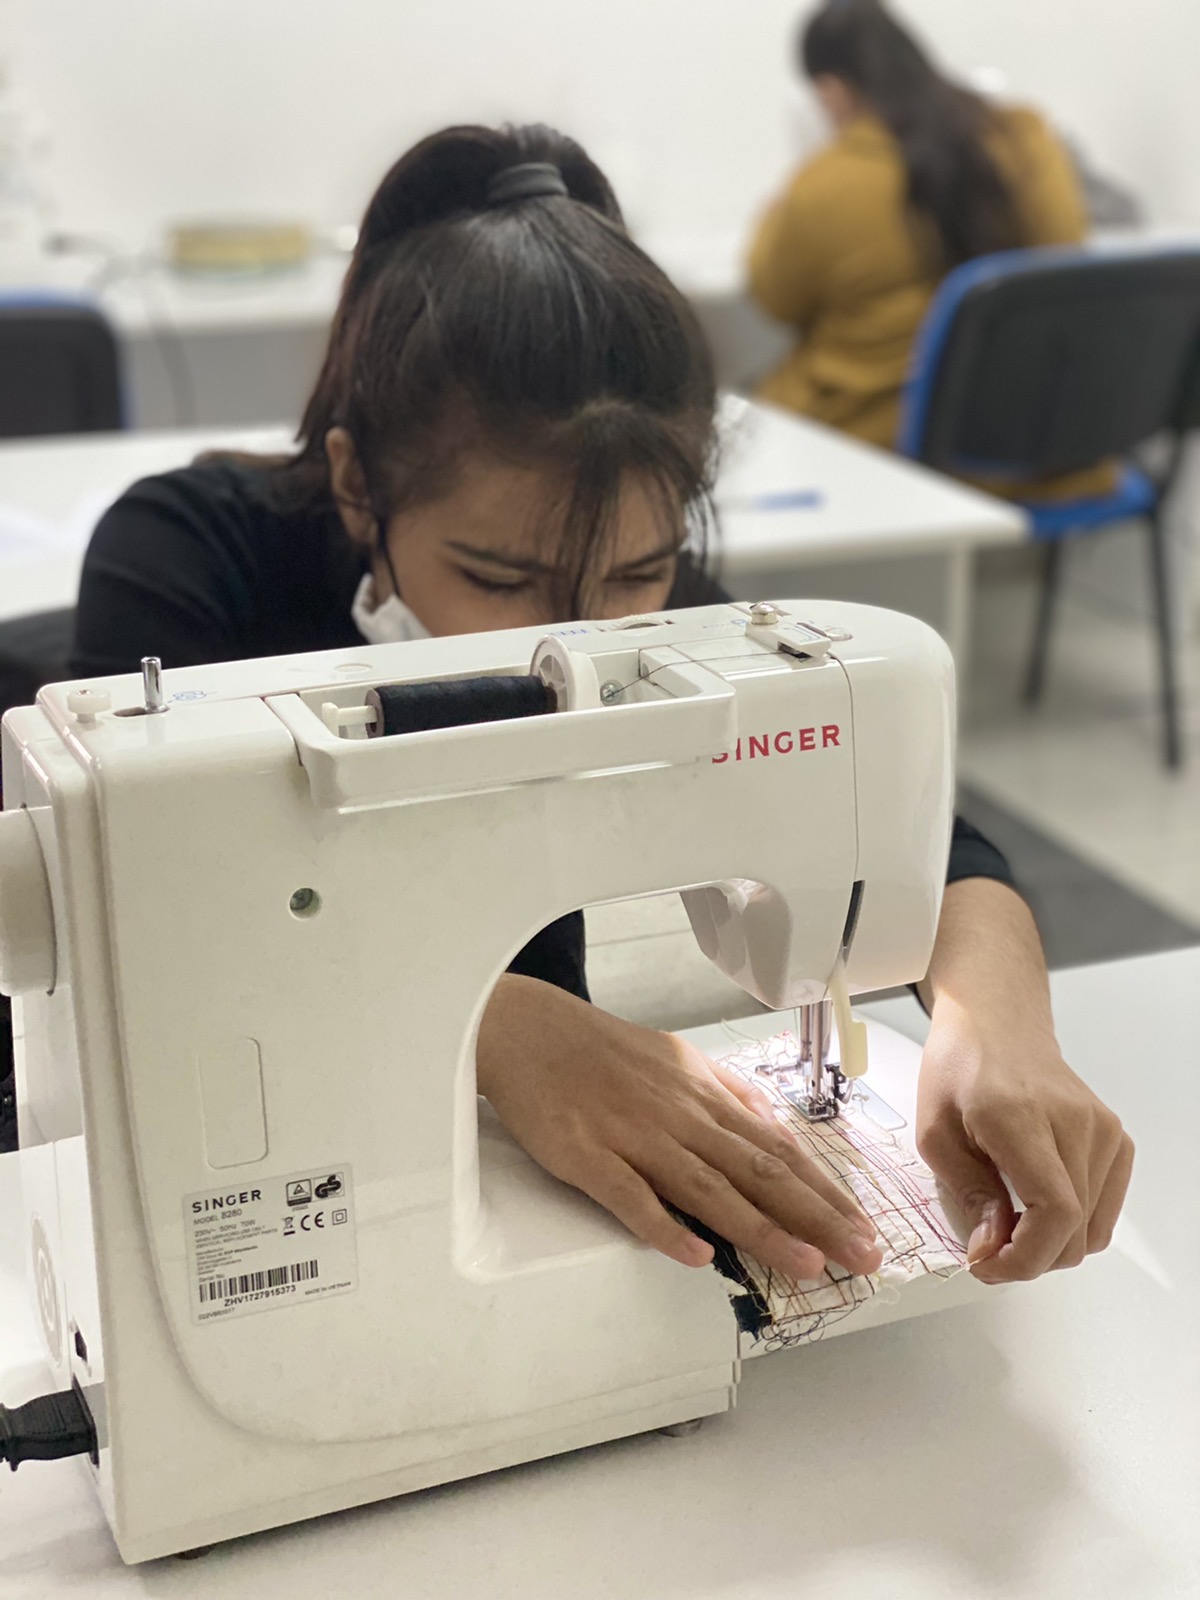 Training for using sewing machines for members of RE population began within the project "Women as carriers of positive social changes"